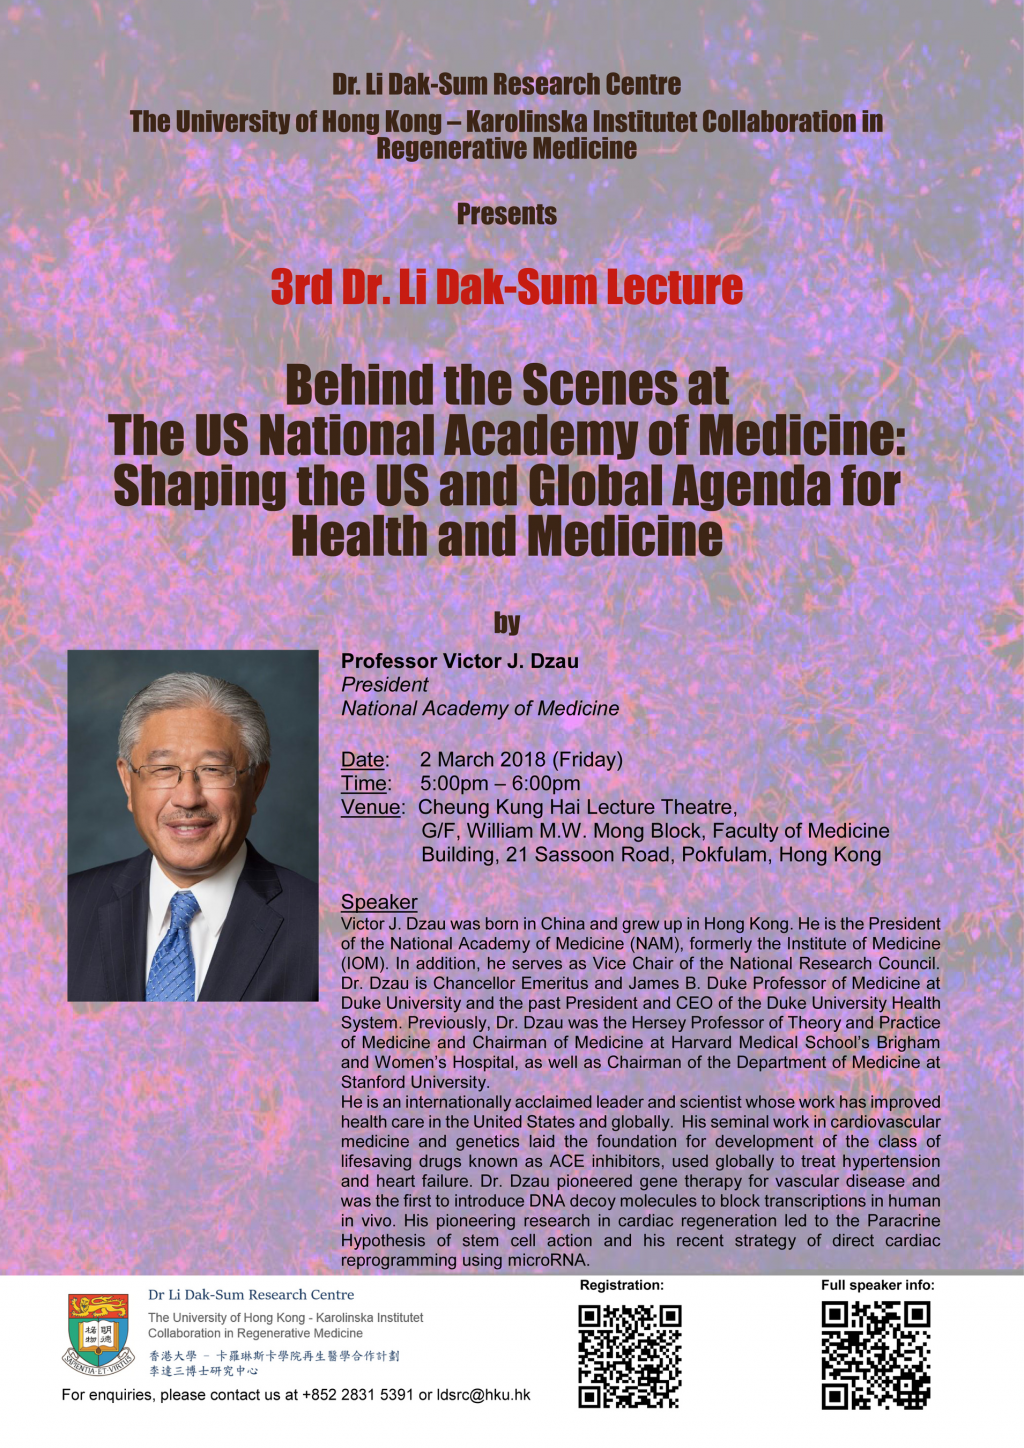 Behind the Scenes at The US National Academy of Medicine: Shaping the US and Global Agenda for Health and Medicine by Professor Victor Dzau